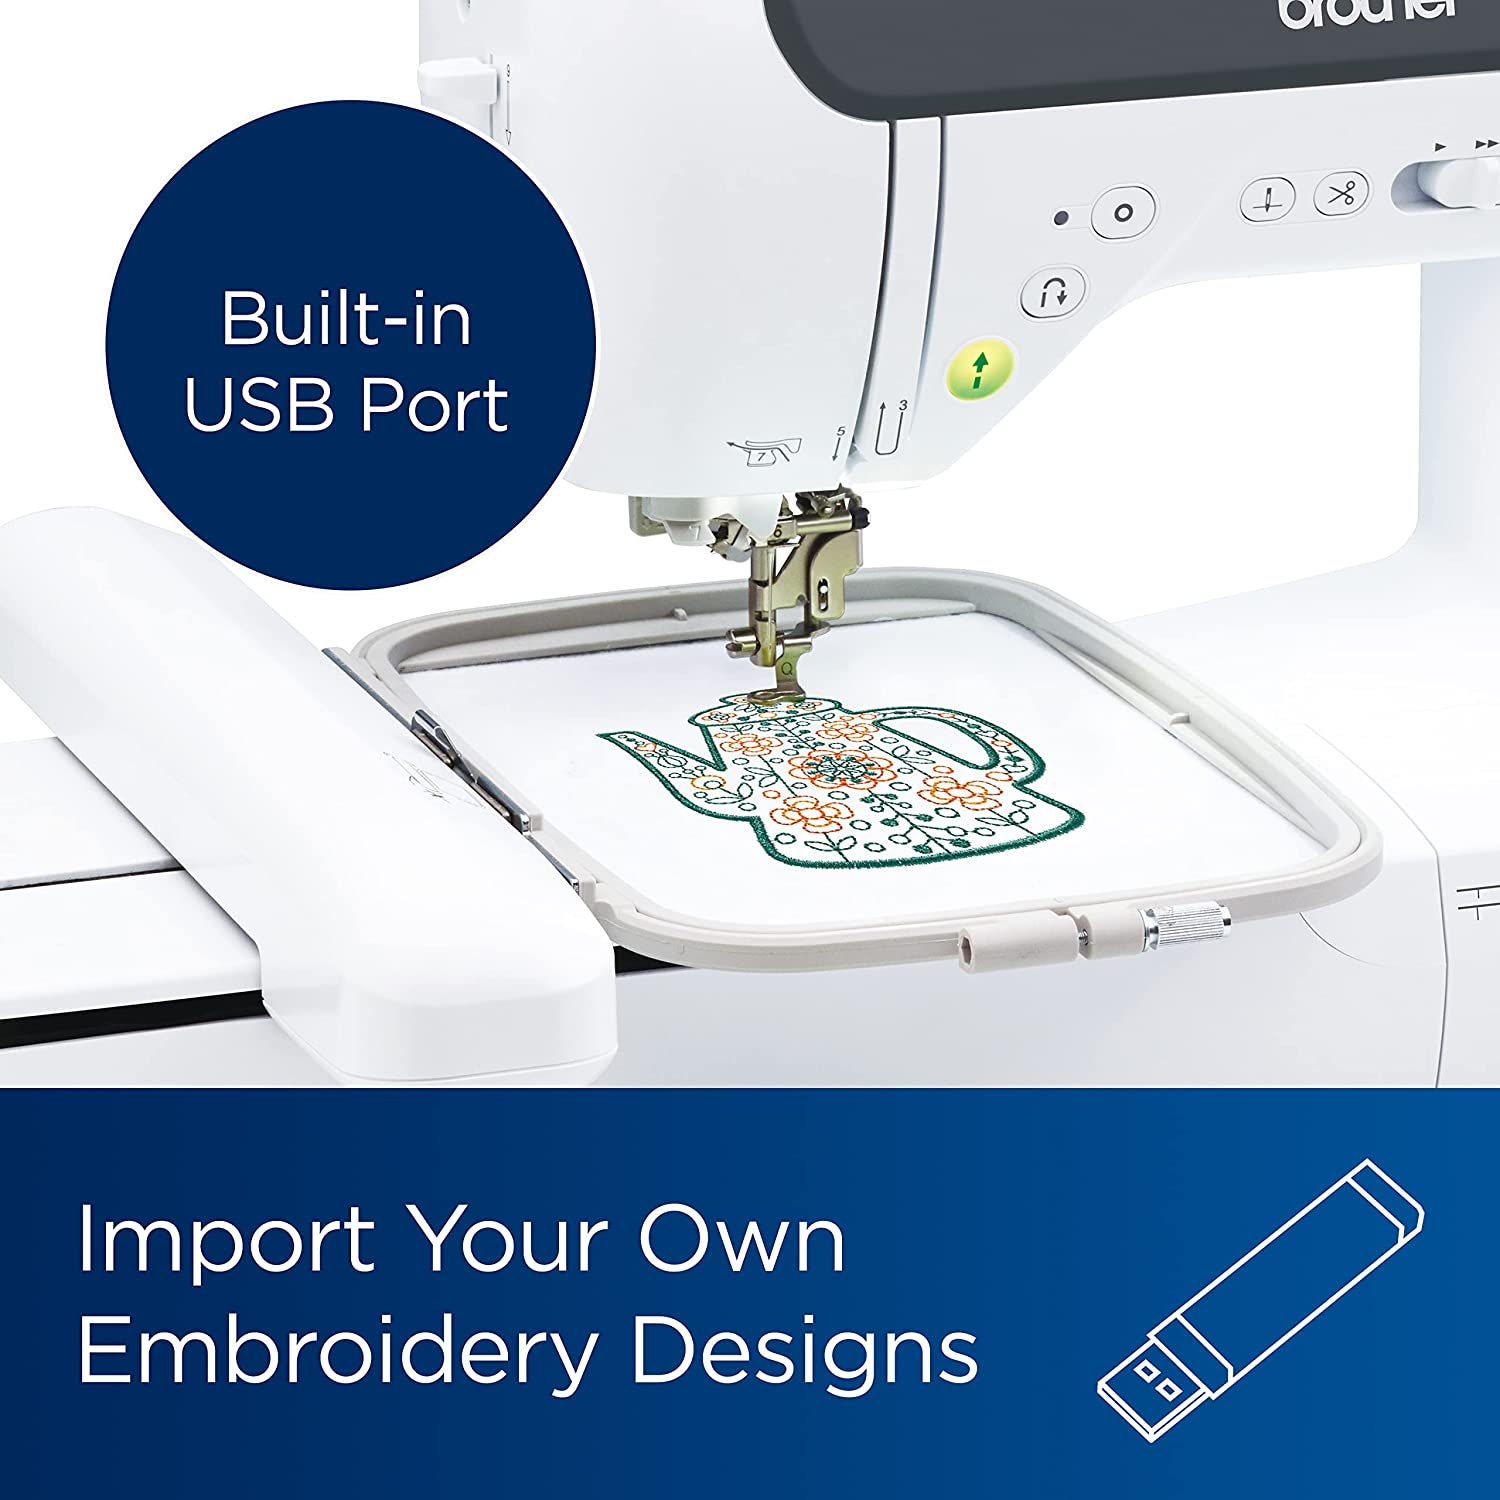 Brother PE900 Sewing and Embroidery Machine with 5 X 7 Hoop and